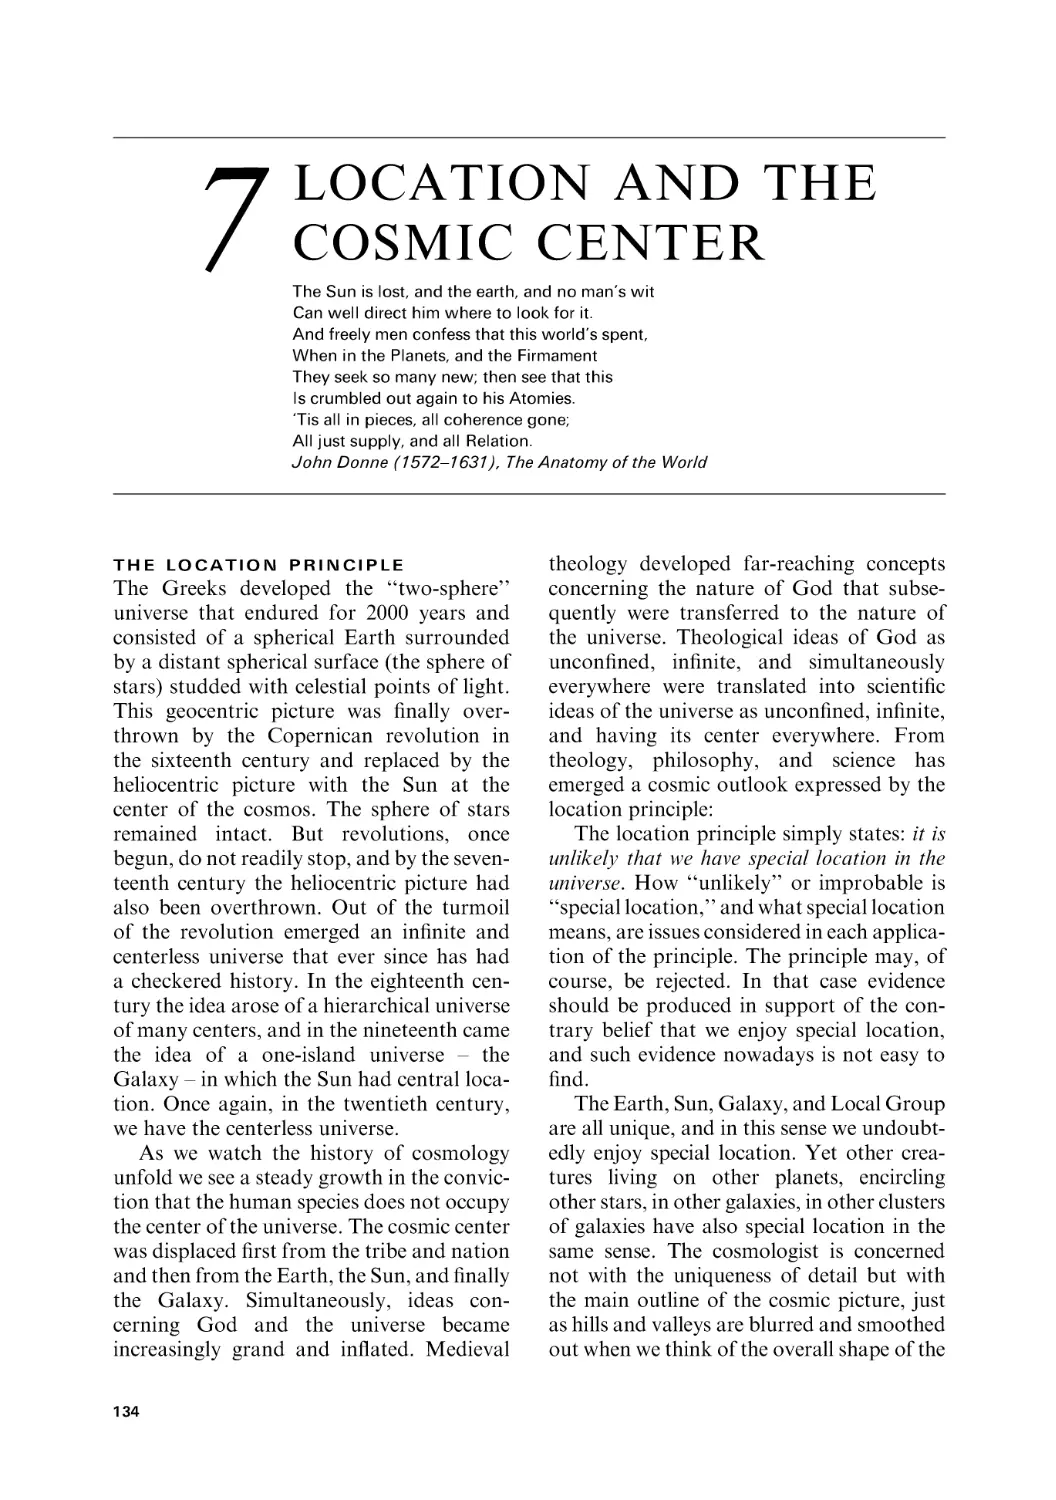 7 Location and the cosmic center